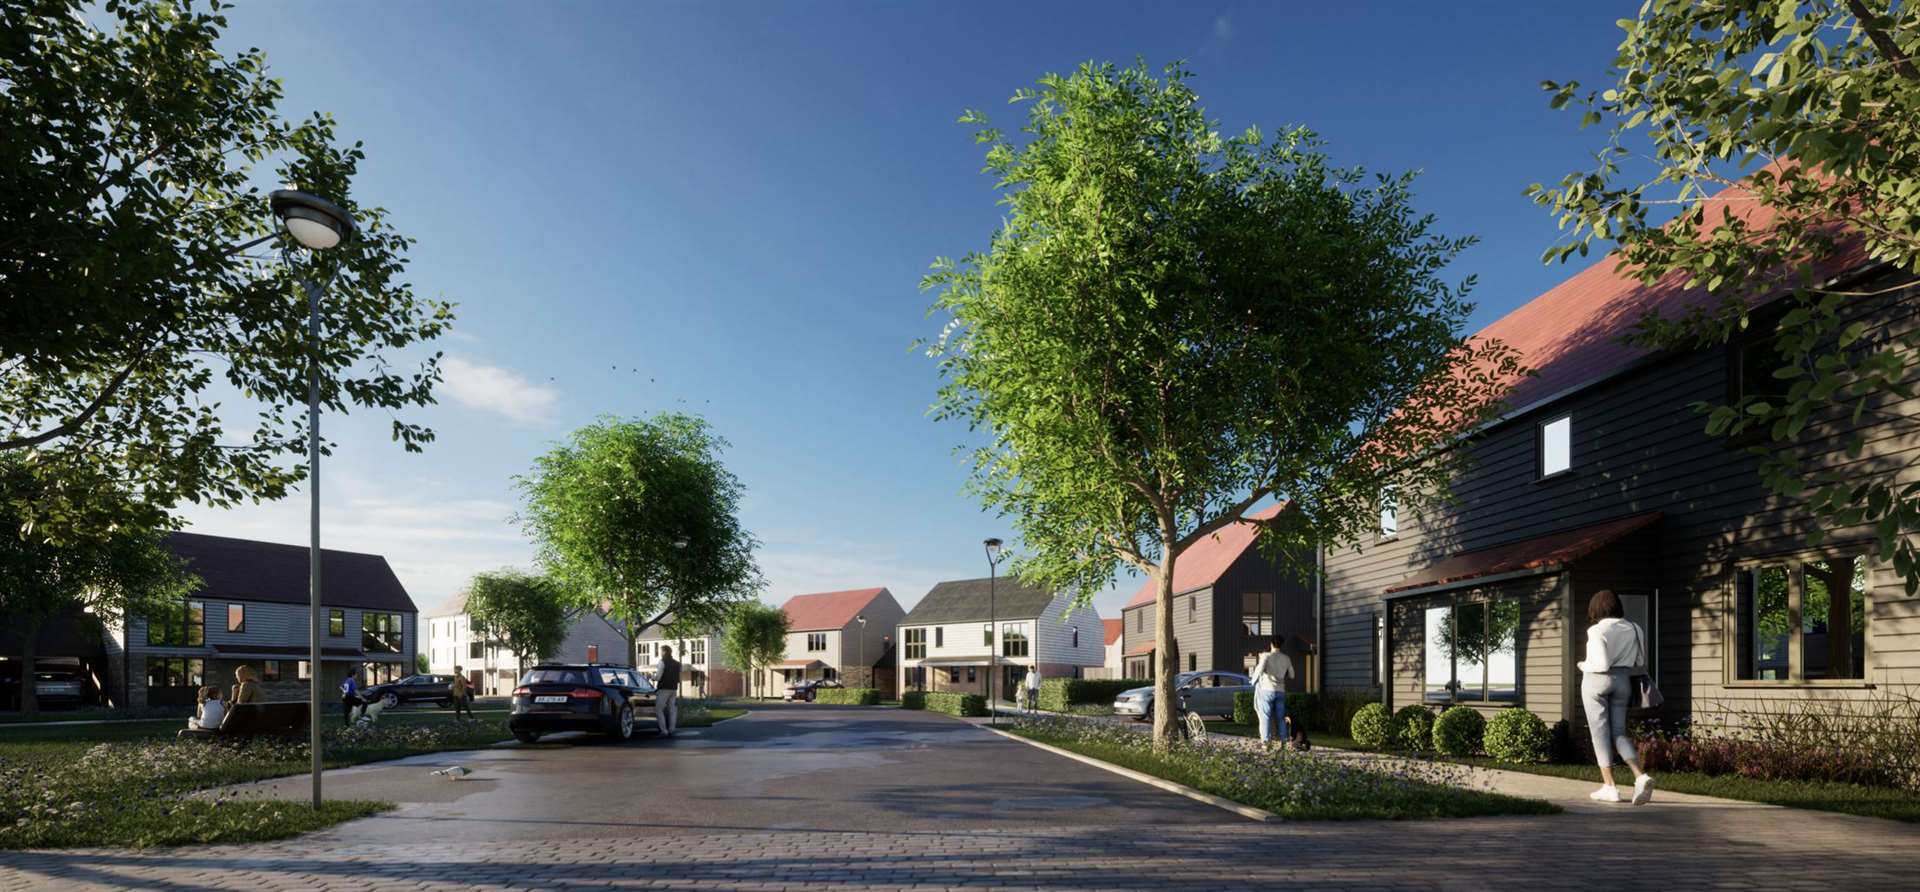 A street view of the layout and appearance of the Kitewood development in Hillborough near Herne Bay